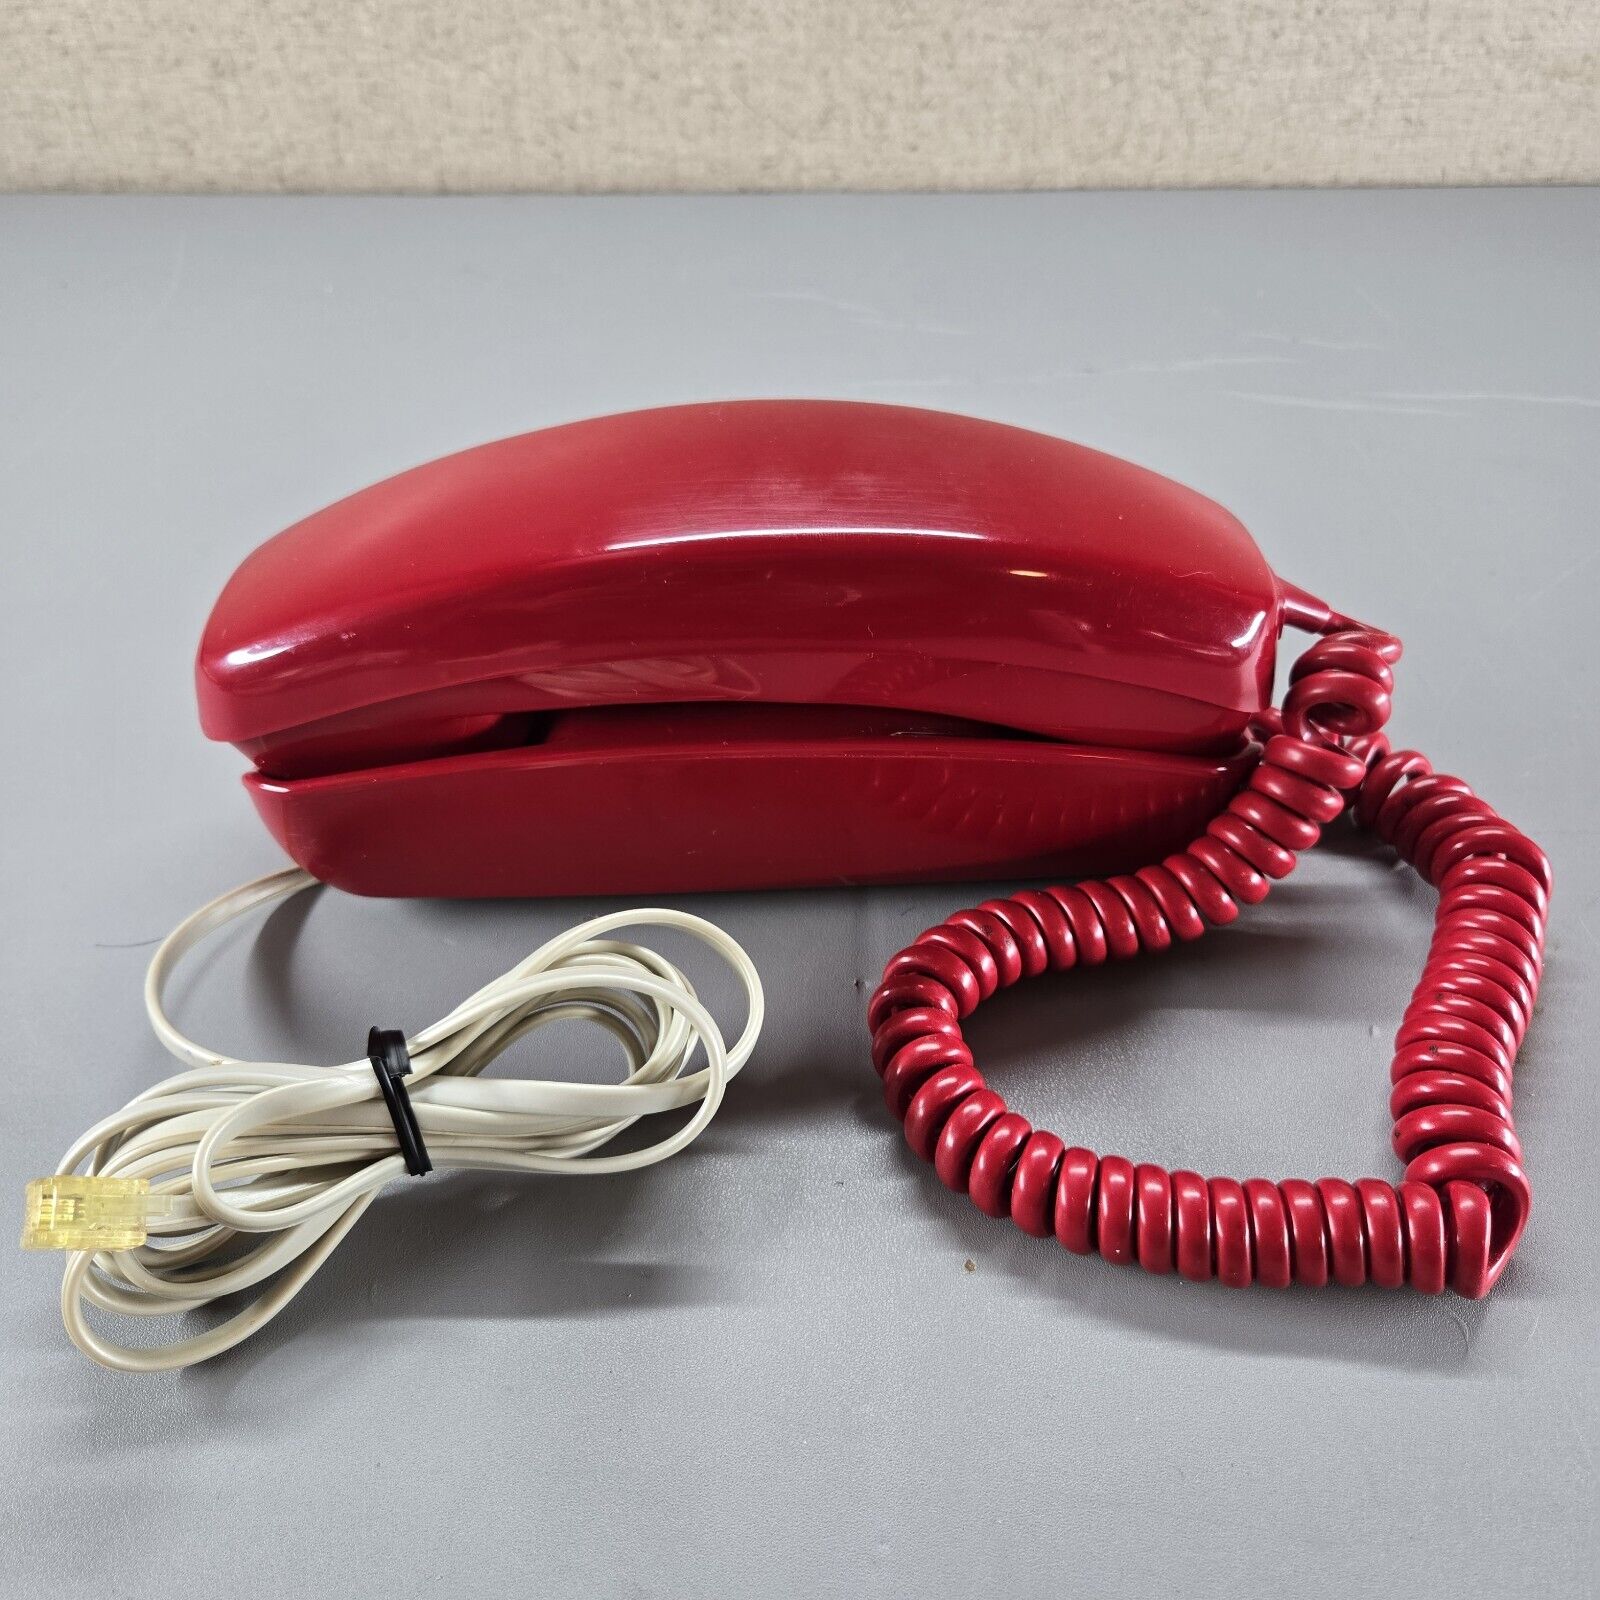 Vintage 1979 ITT Red Trimline Rotary Wall Or Desk Line Phone - Untested